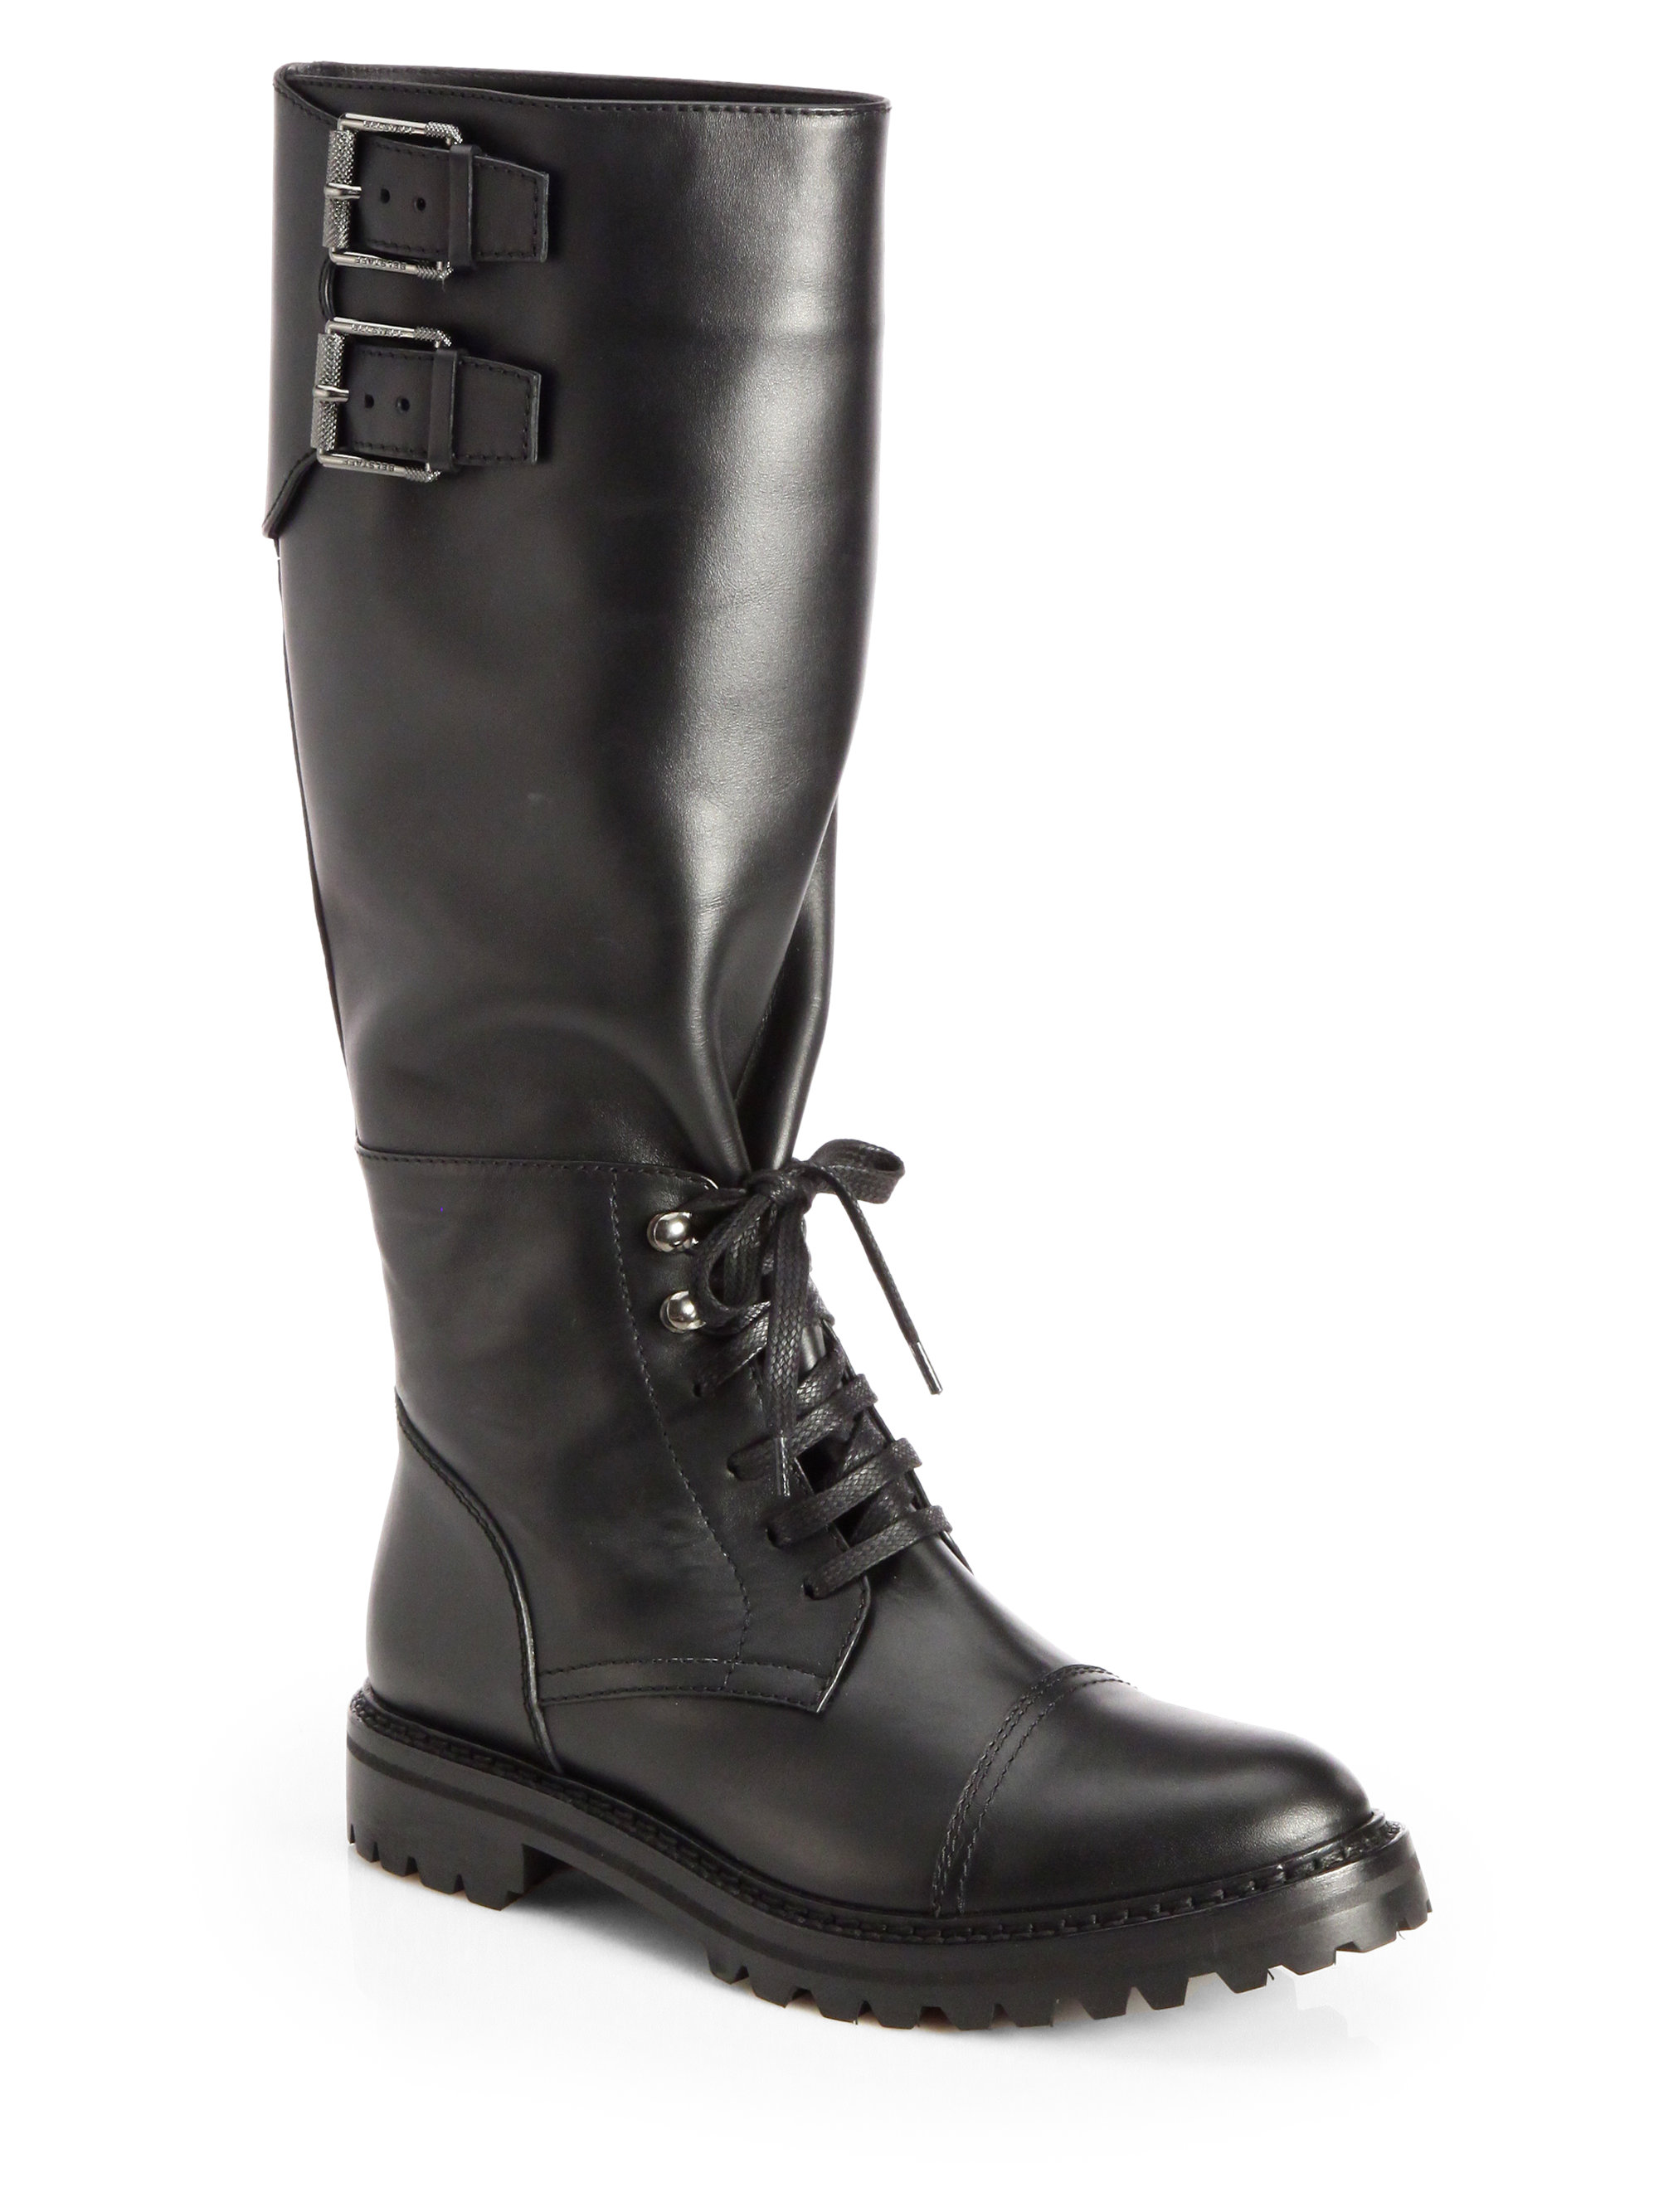 Lyst - Belstaff Leather Lugsole Boots in Black